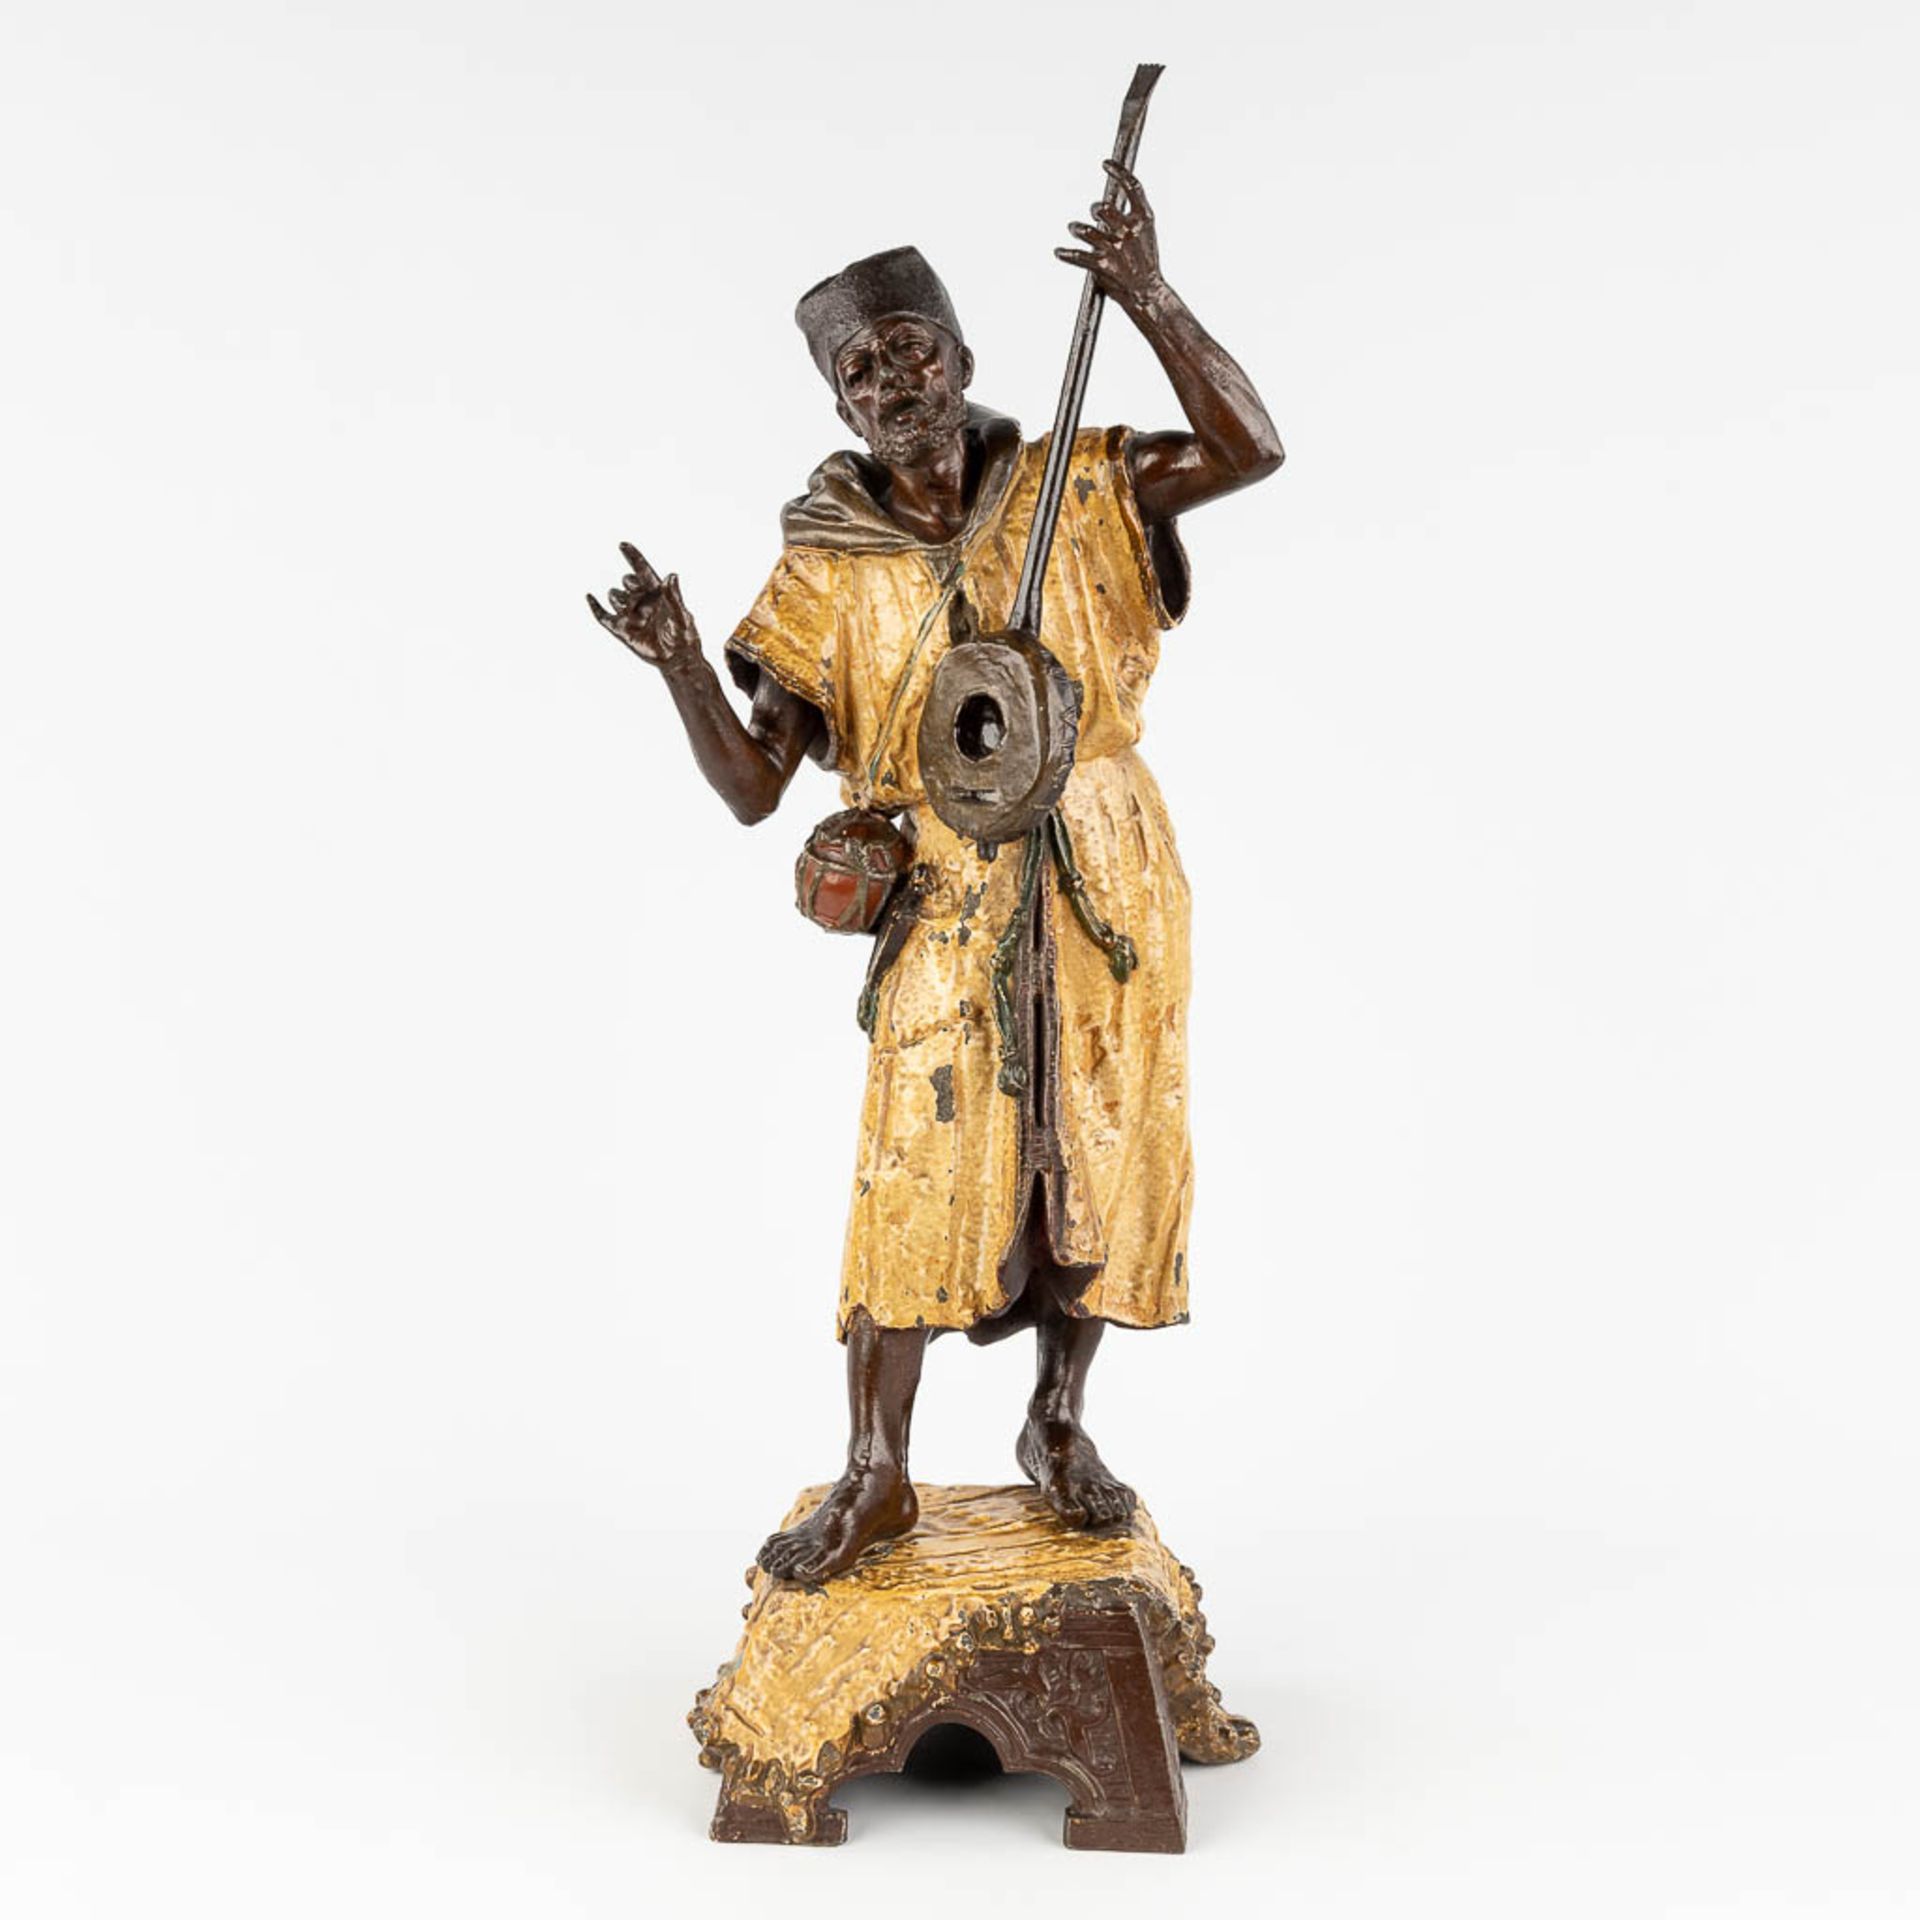 A large figurine of an Arab Bedouin, playing a musical instrument, patinated spelter. 19th C. (L:17,